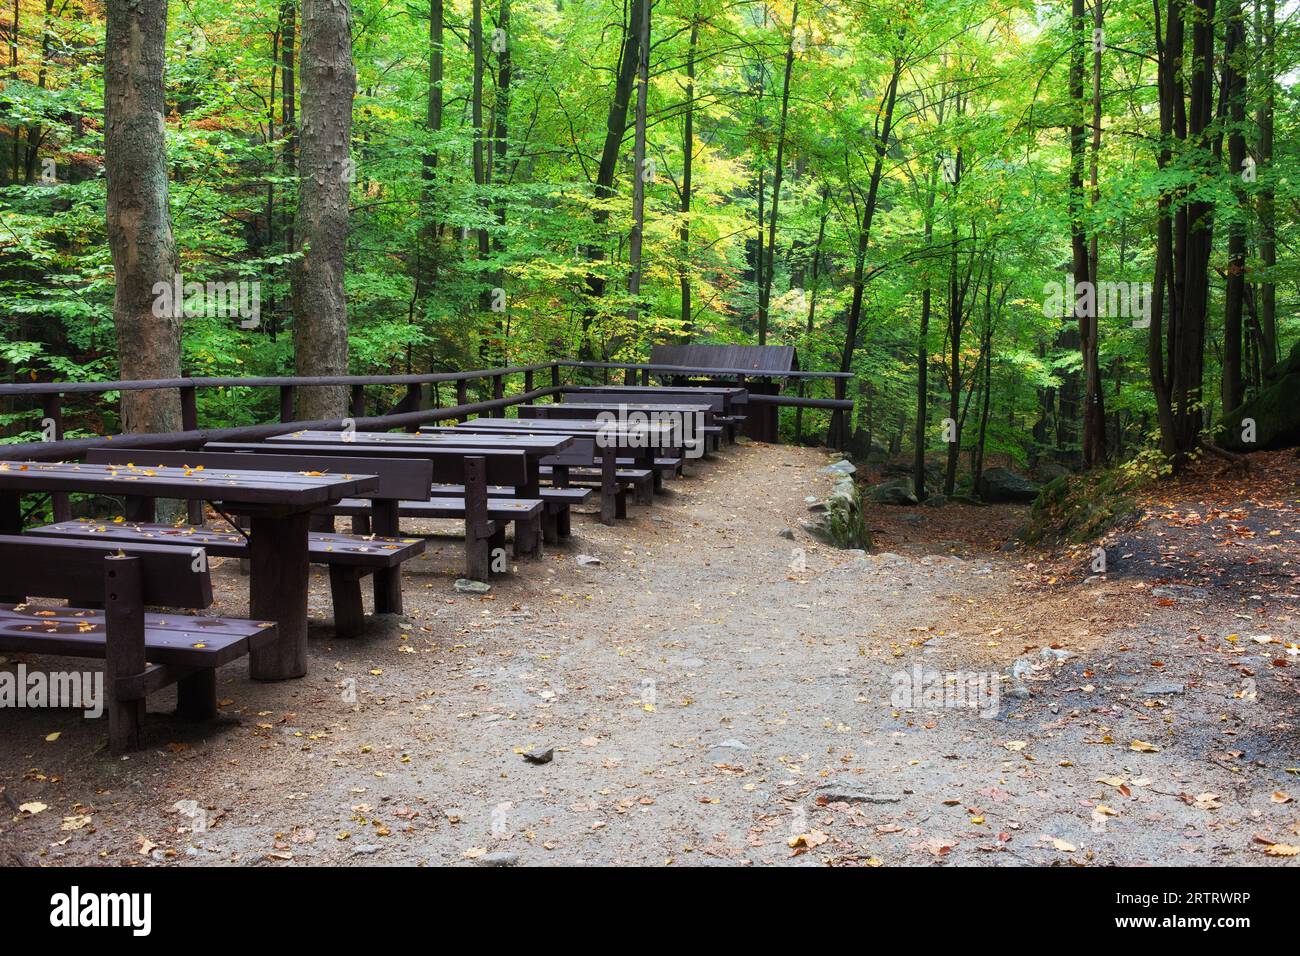 Tables with benches in forest, picnic and rest place in healthy natural environment Stock Photo